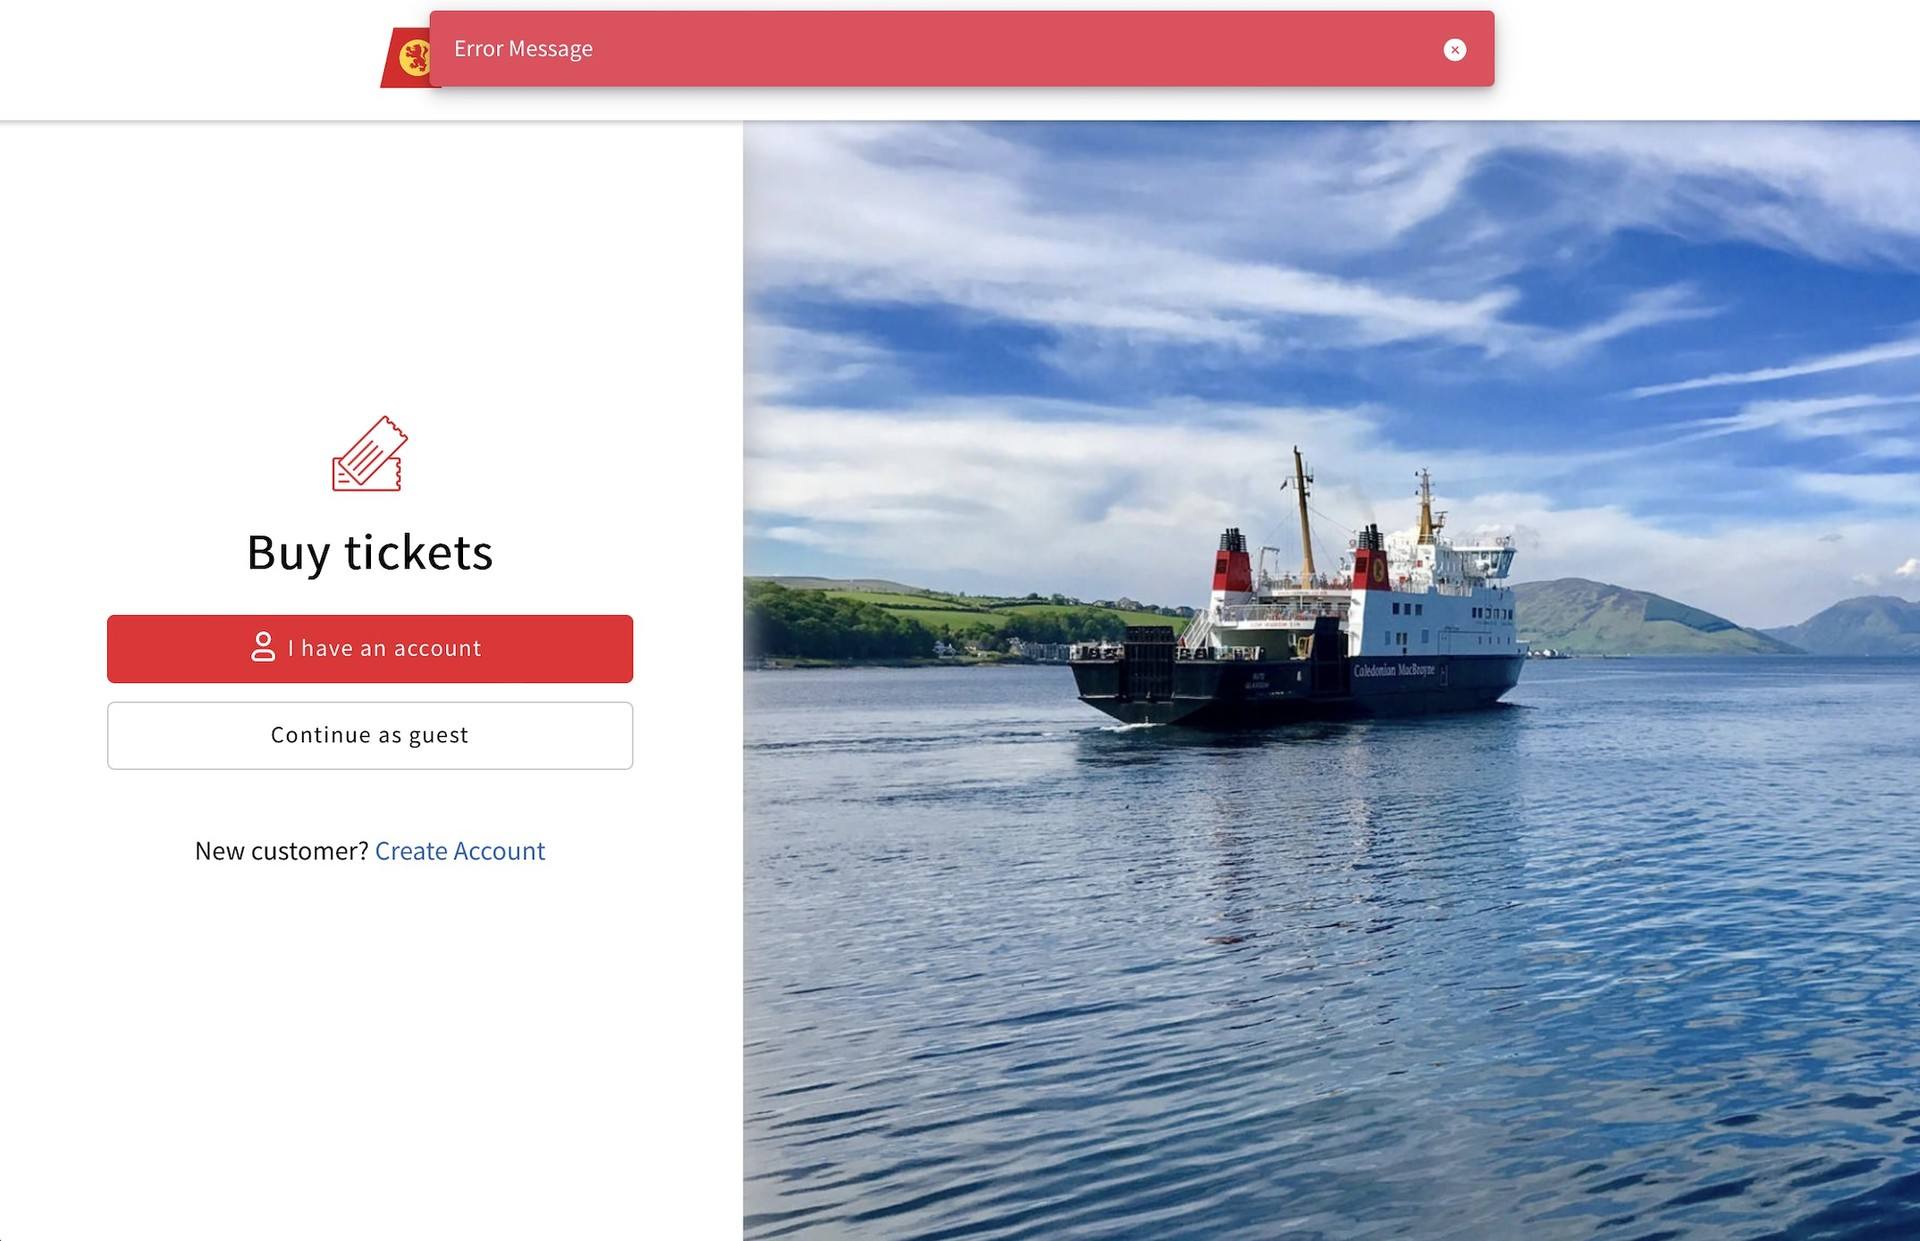 CalMac's long-awaited new ticketing system was plagued by issues when it launched on Wednesday morning.